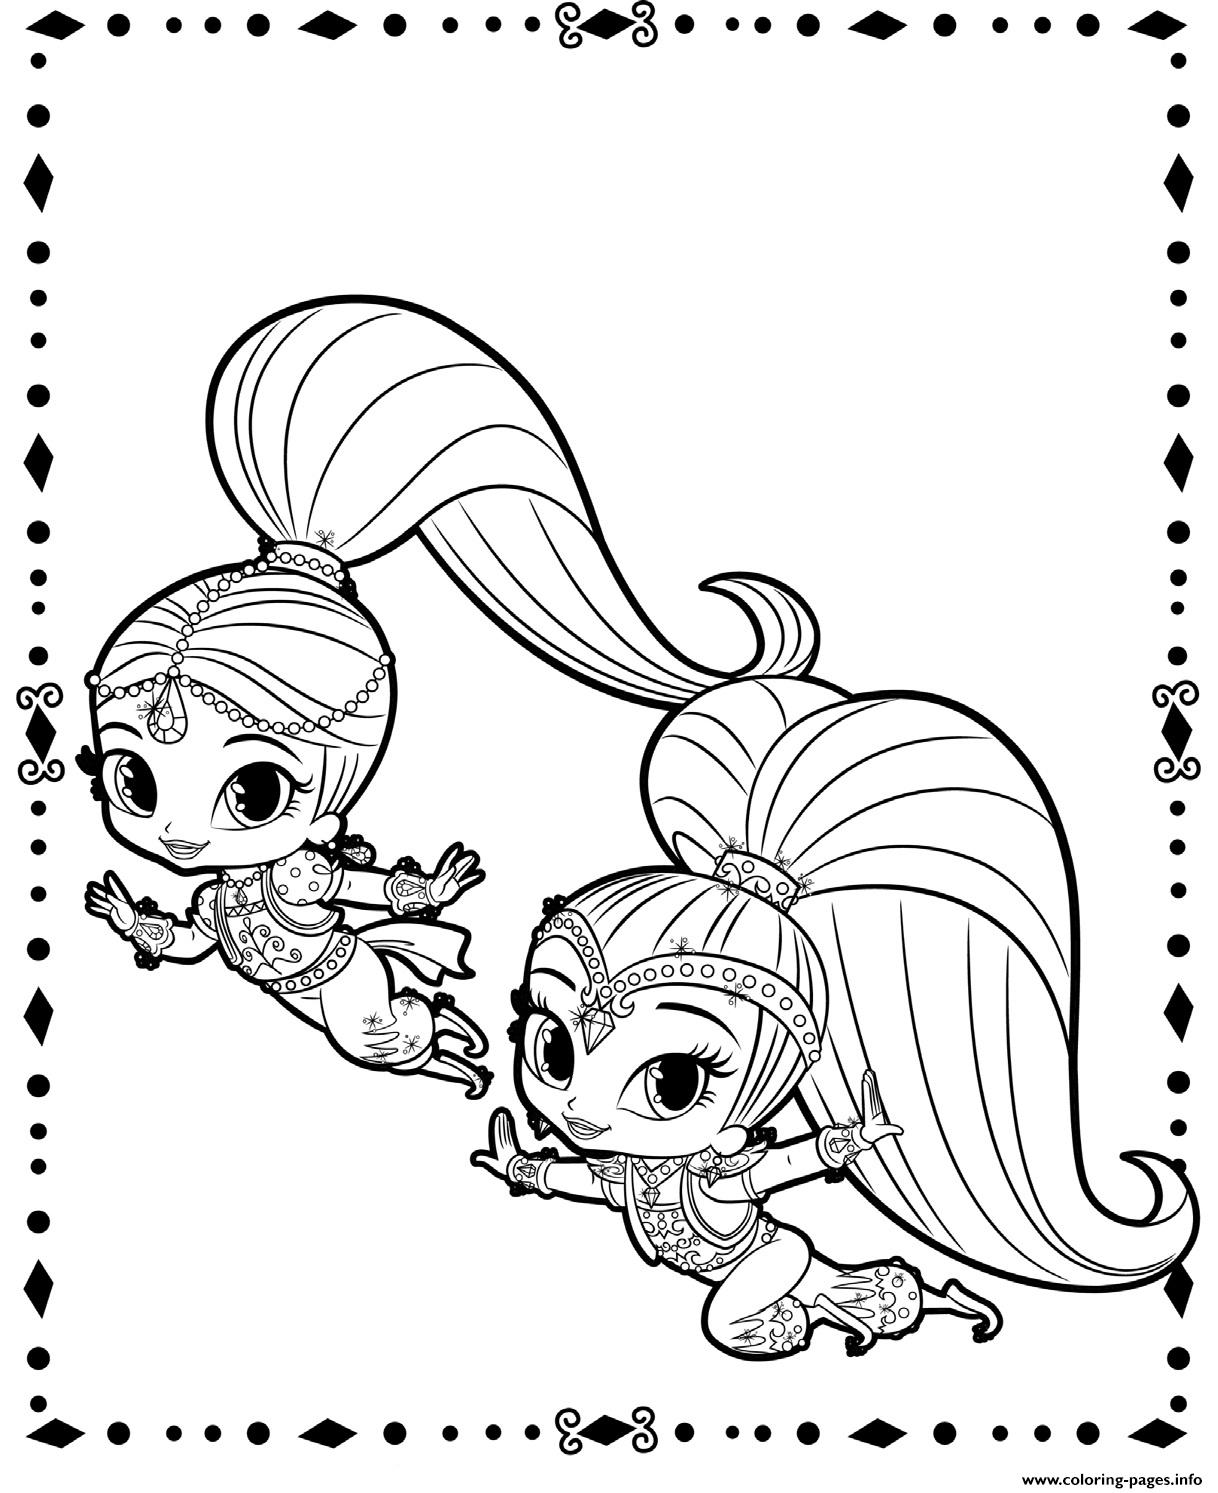 Fluing Genies Shimmer And Shine coloring pages